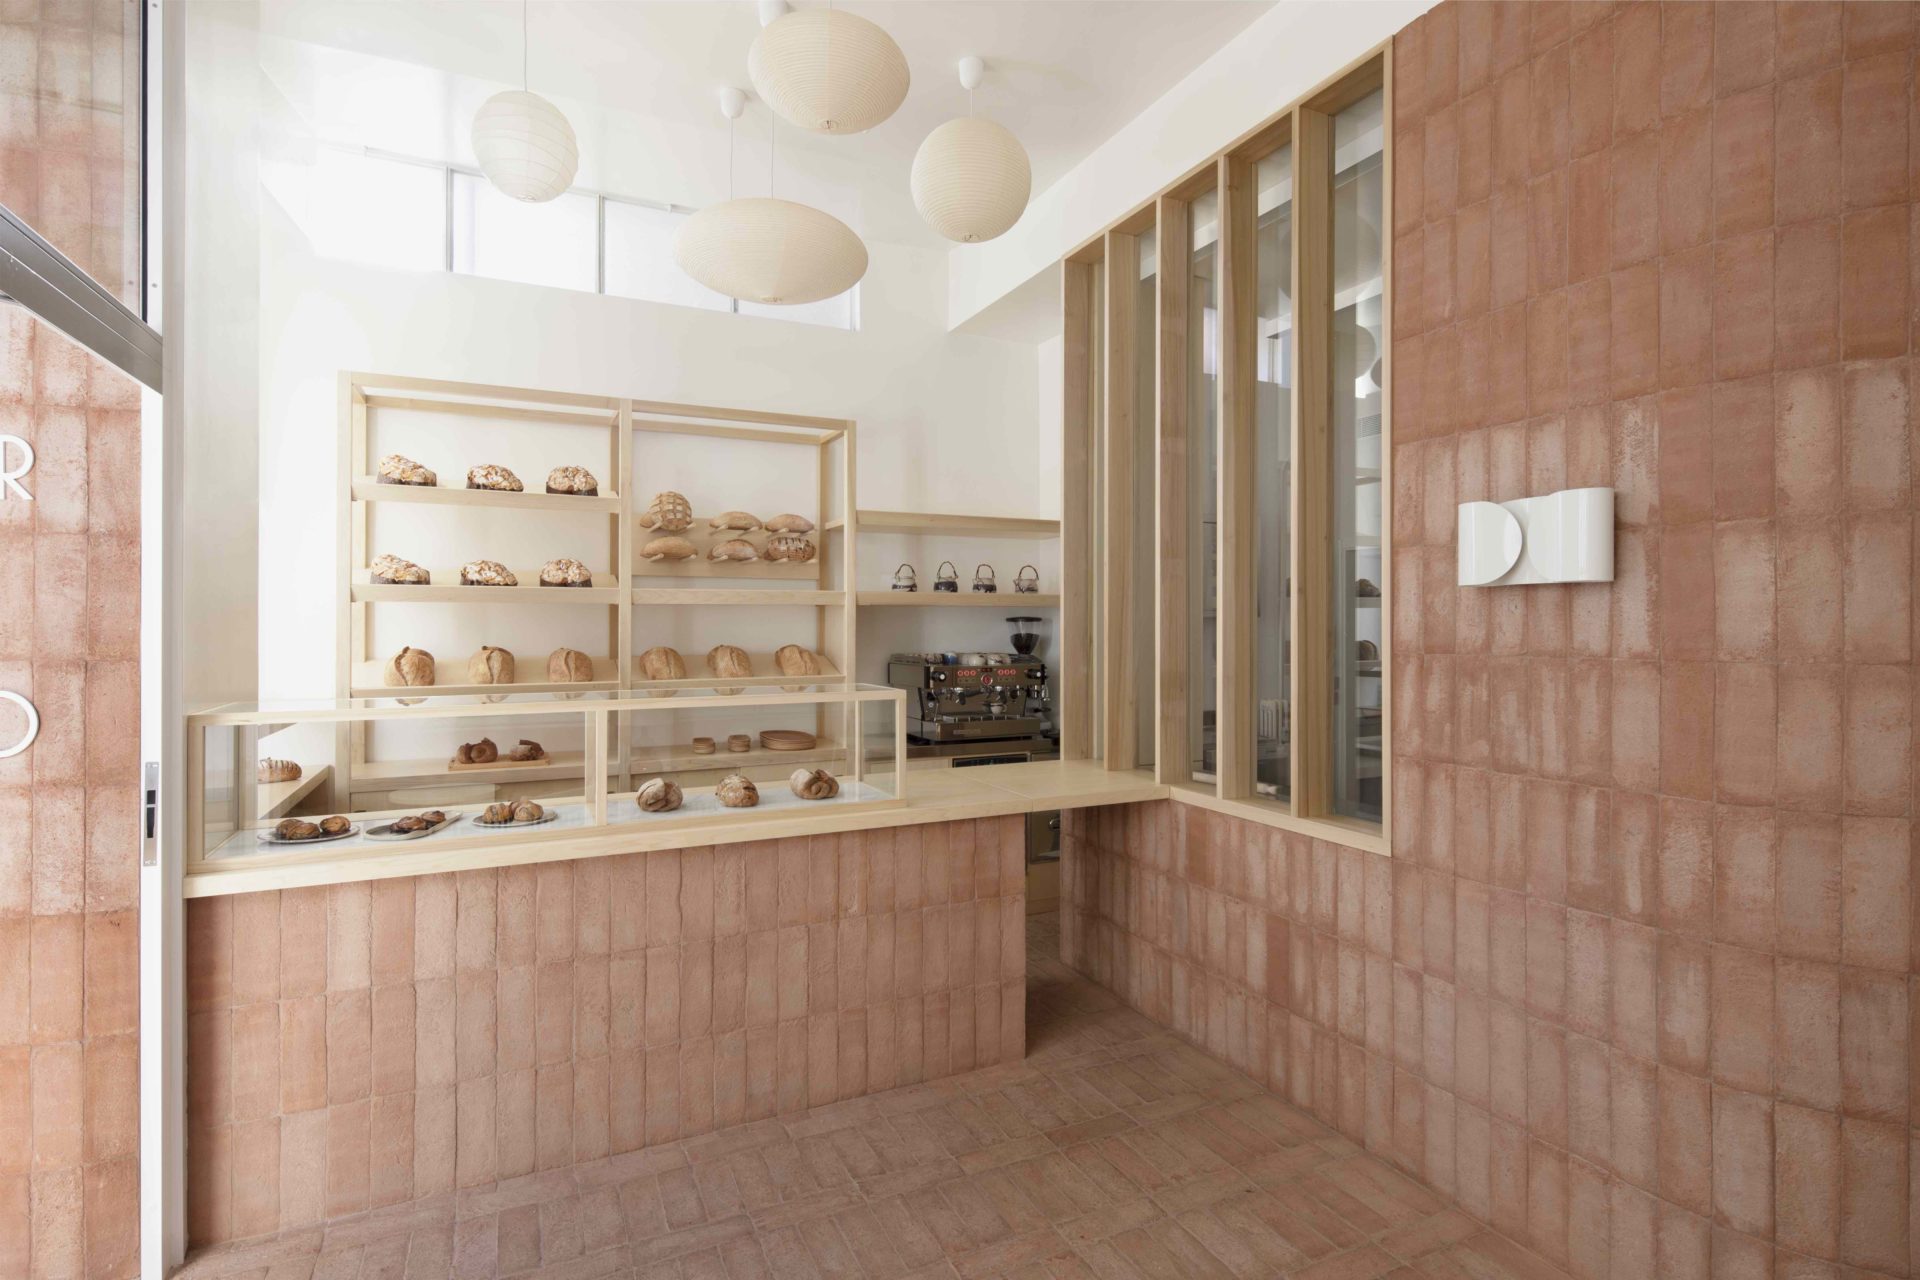 Nordic bakery in Milan takes inspiration from Californian modernism –  Workplace